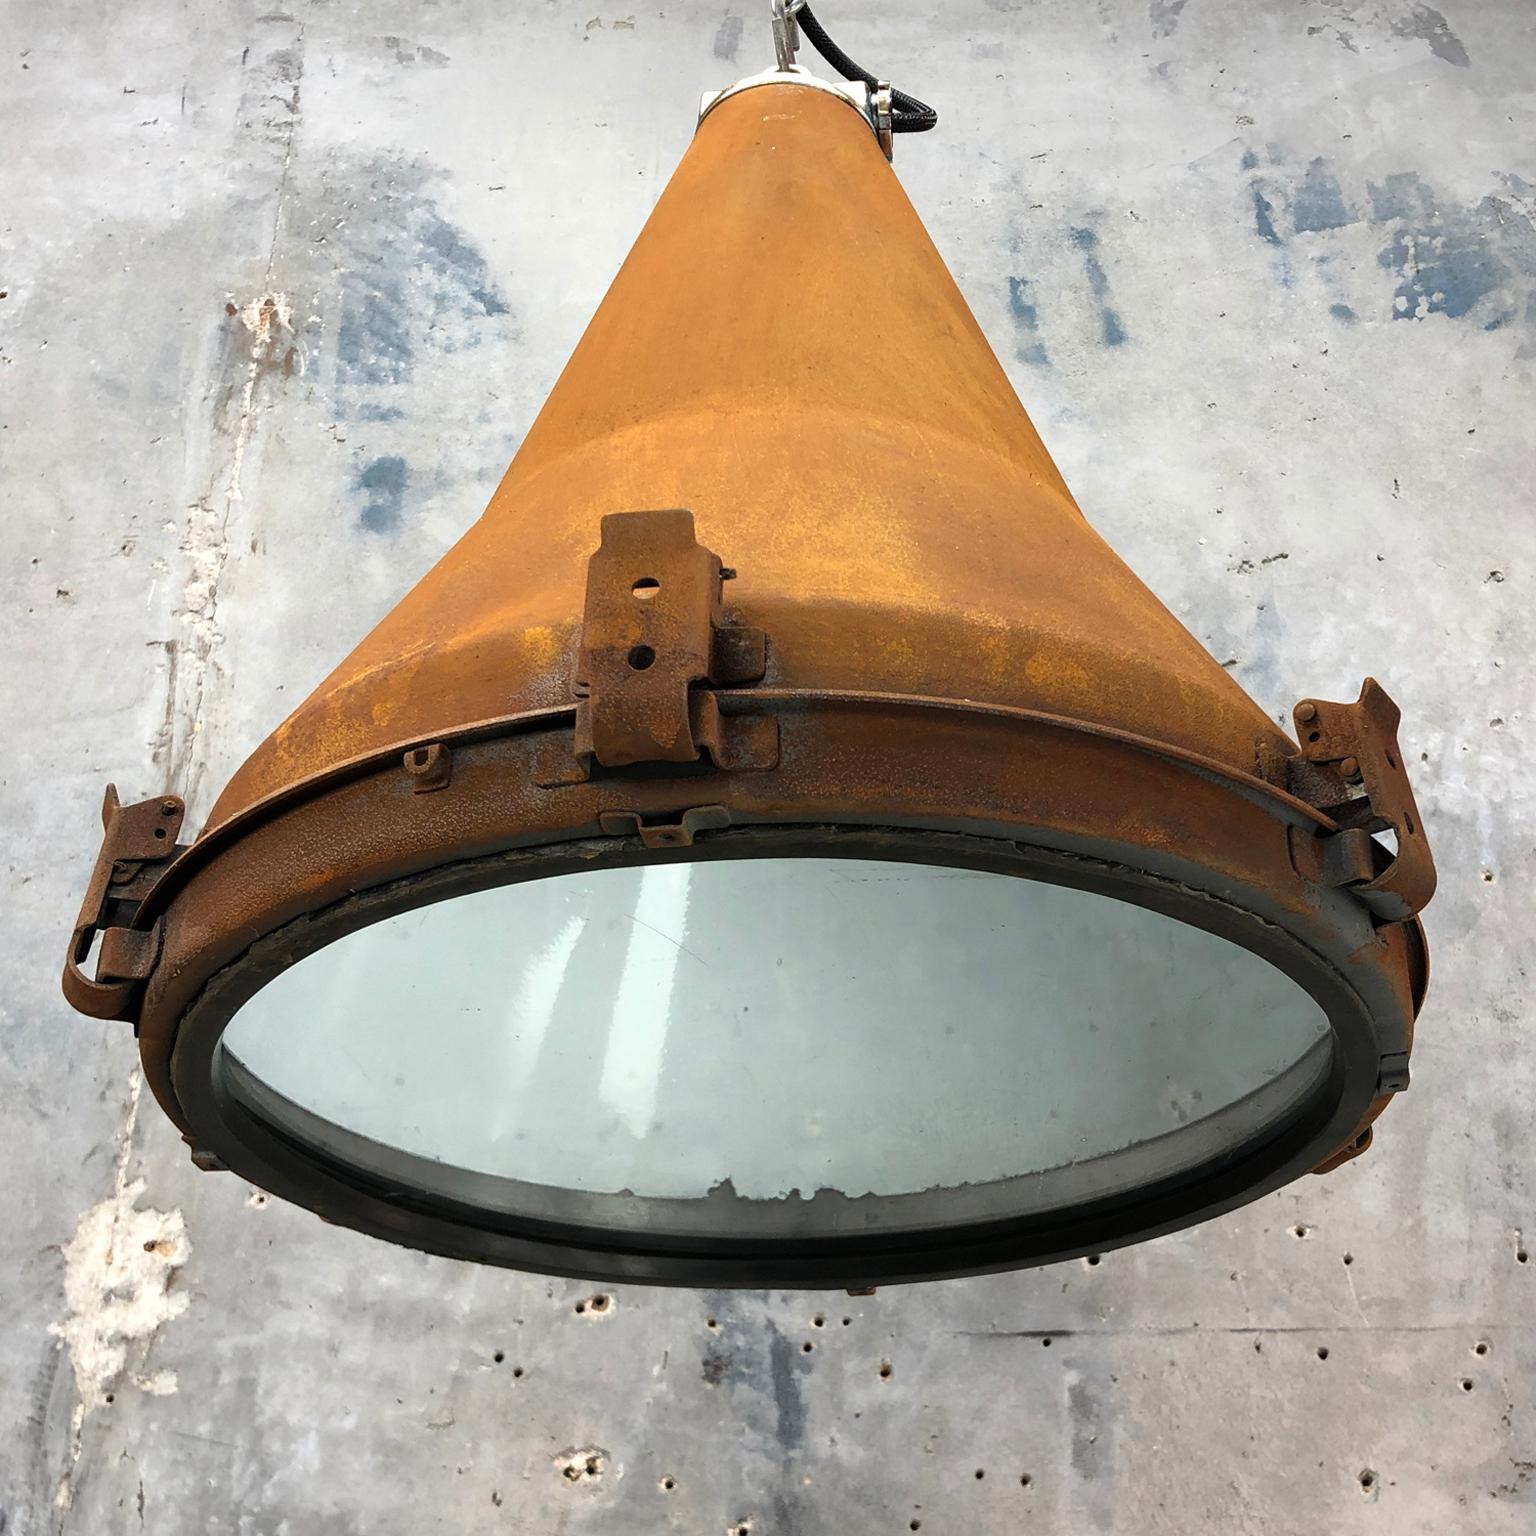 Cast 1970s Korean Vintage Industrial Steel Conical Pendant Light with Applied Rust